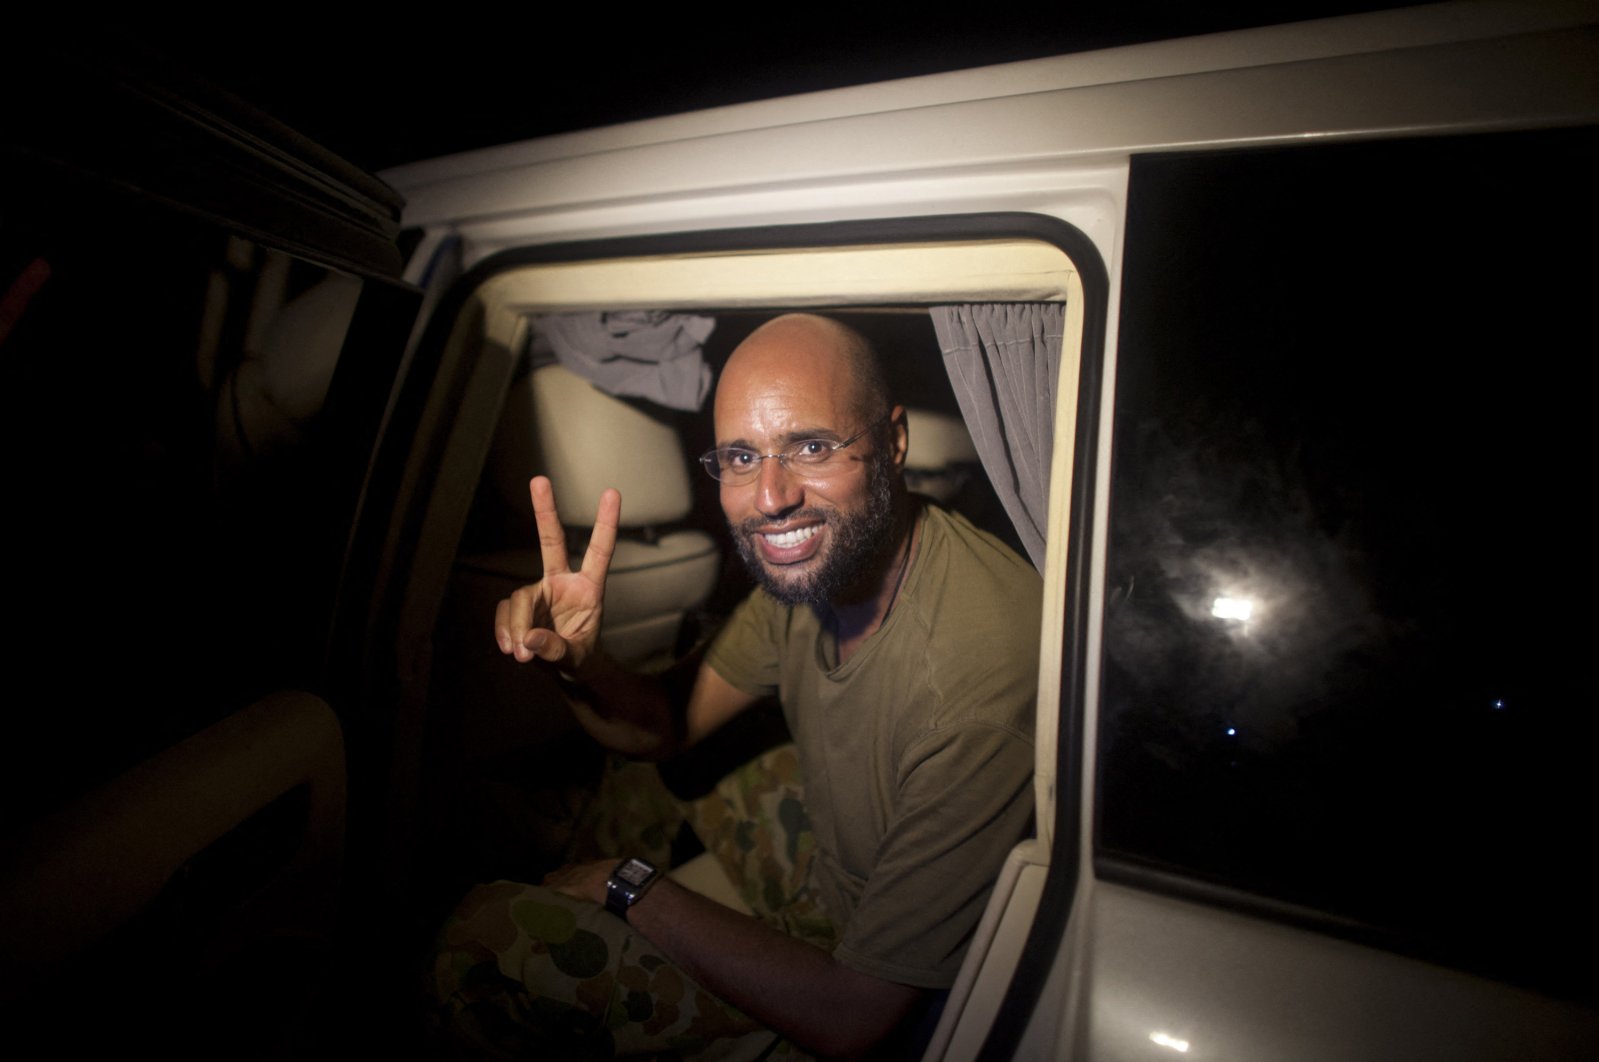 
Saif al-Islam Gadhafi, son of late Libyan dictator Moammar Gadhafi, flashes the V-sign for victory as he appears in front of supporters and journalists in Tripoli, Libya, Aug. 23, 2011. (AFP)